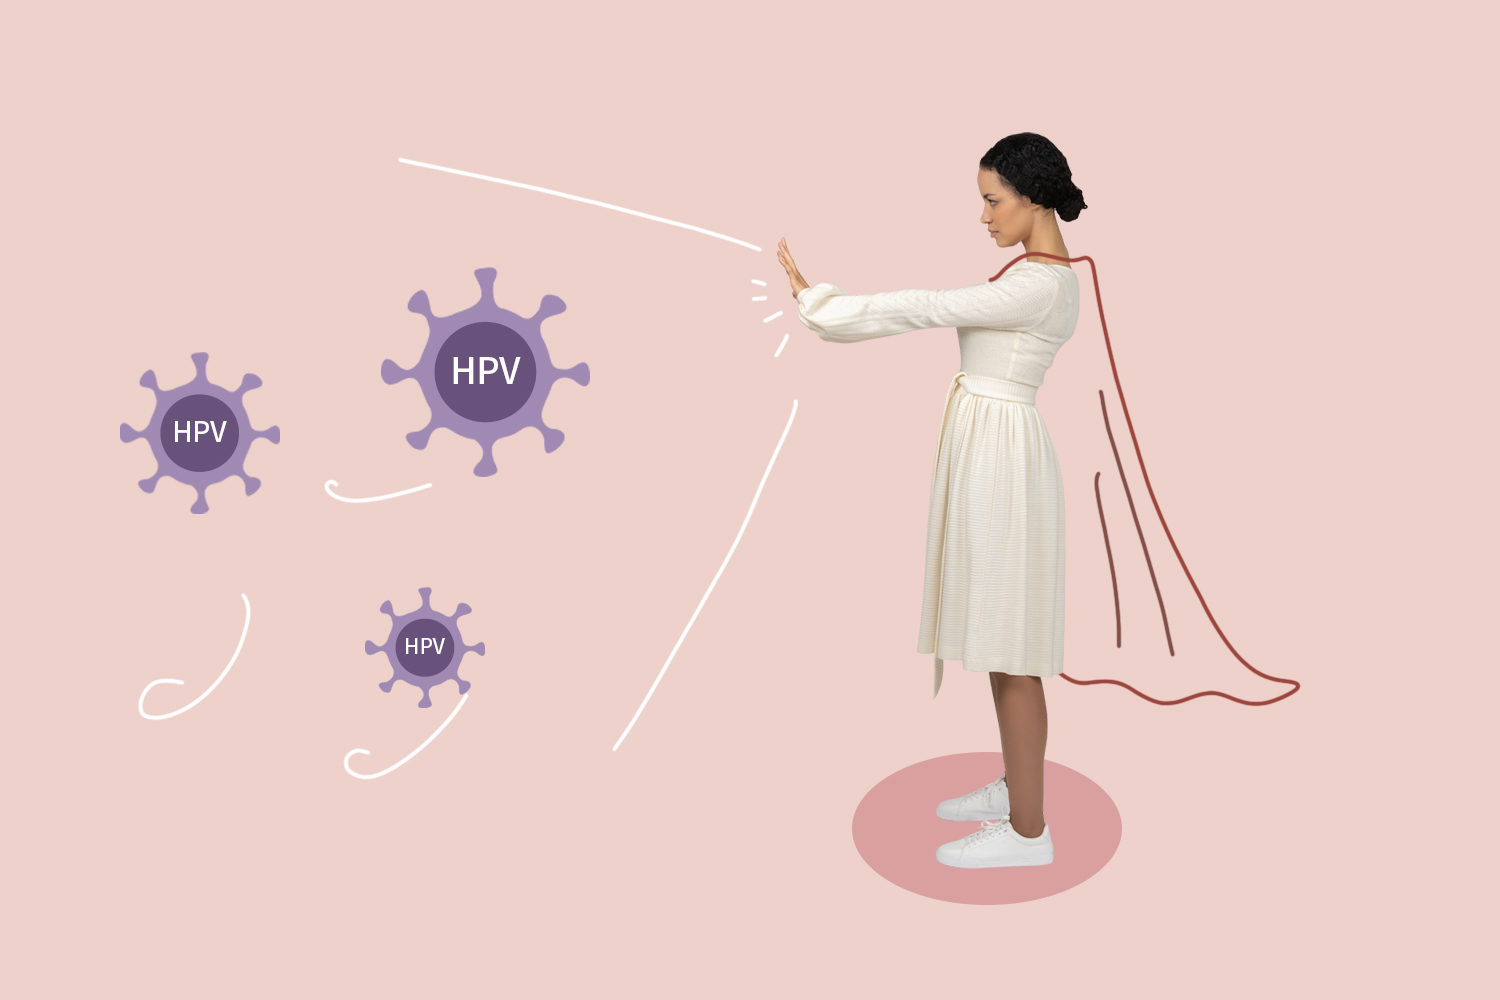 Hpv during pregnancy symptoms. Hpv during pregnancy stories, Human papillomavirus and breast cancer